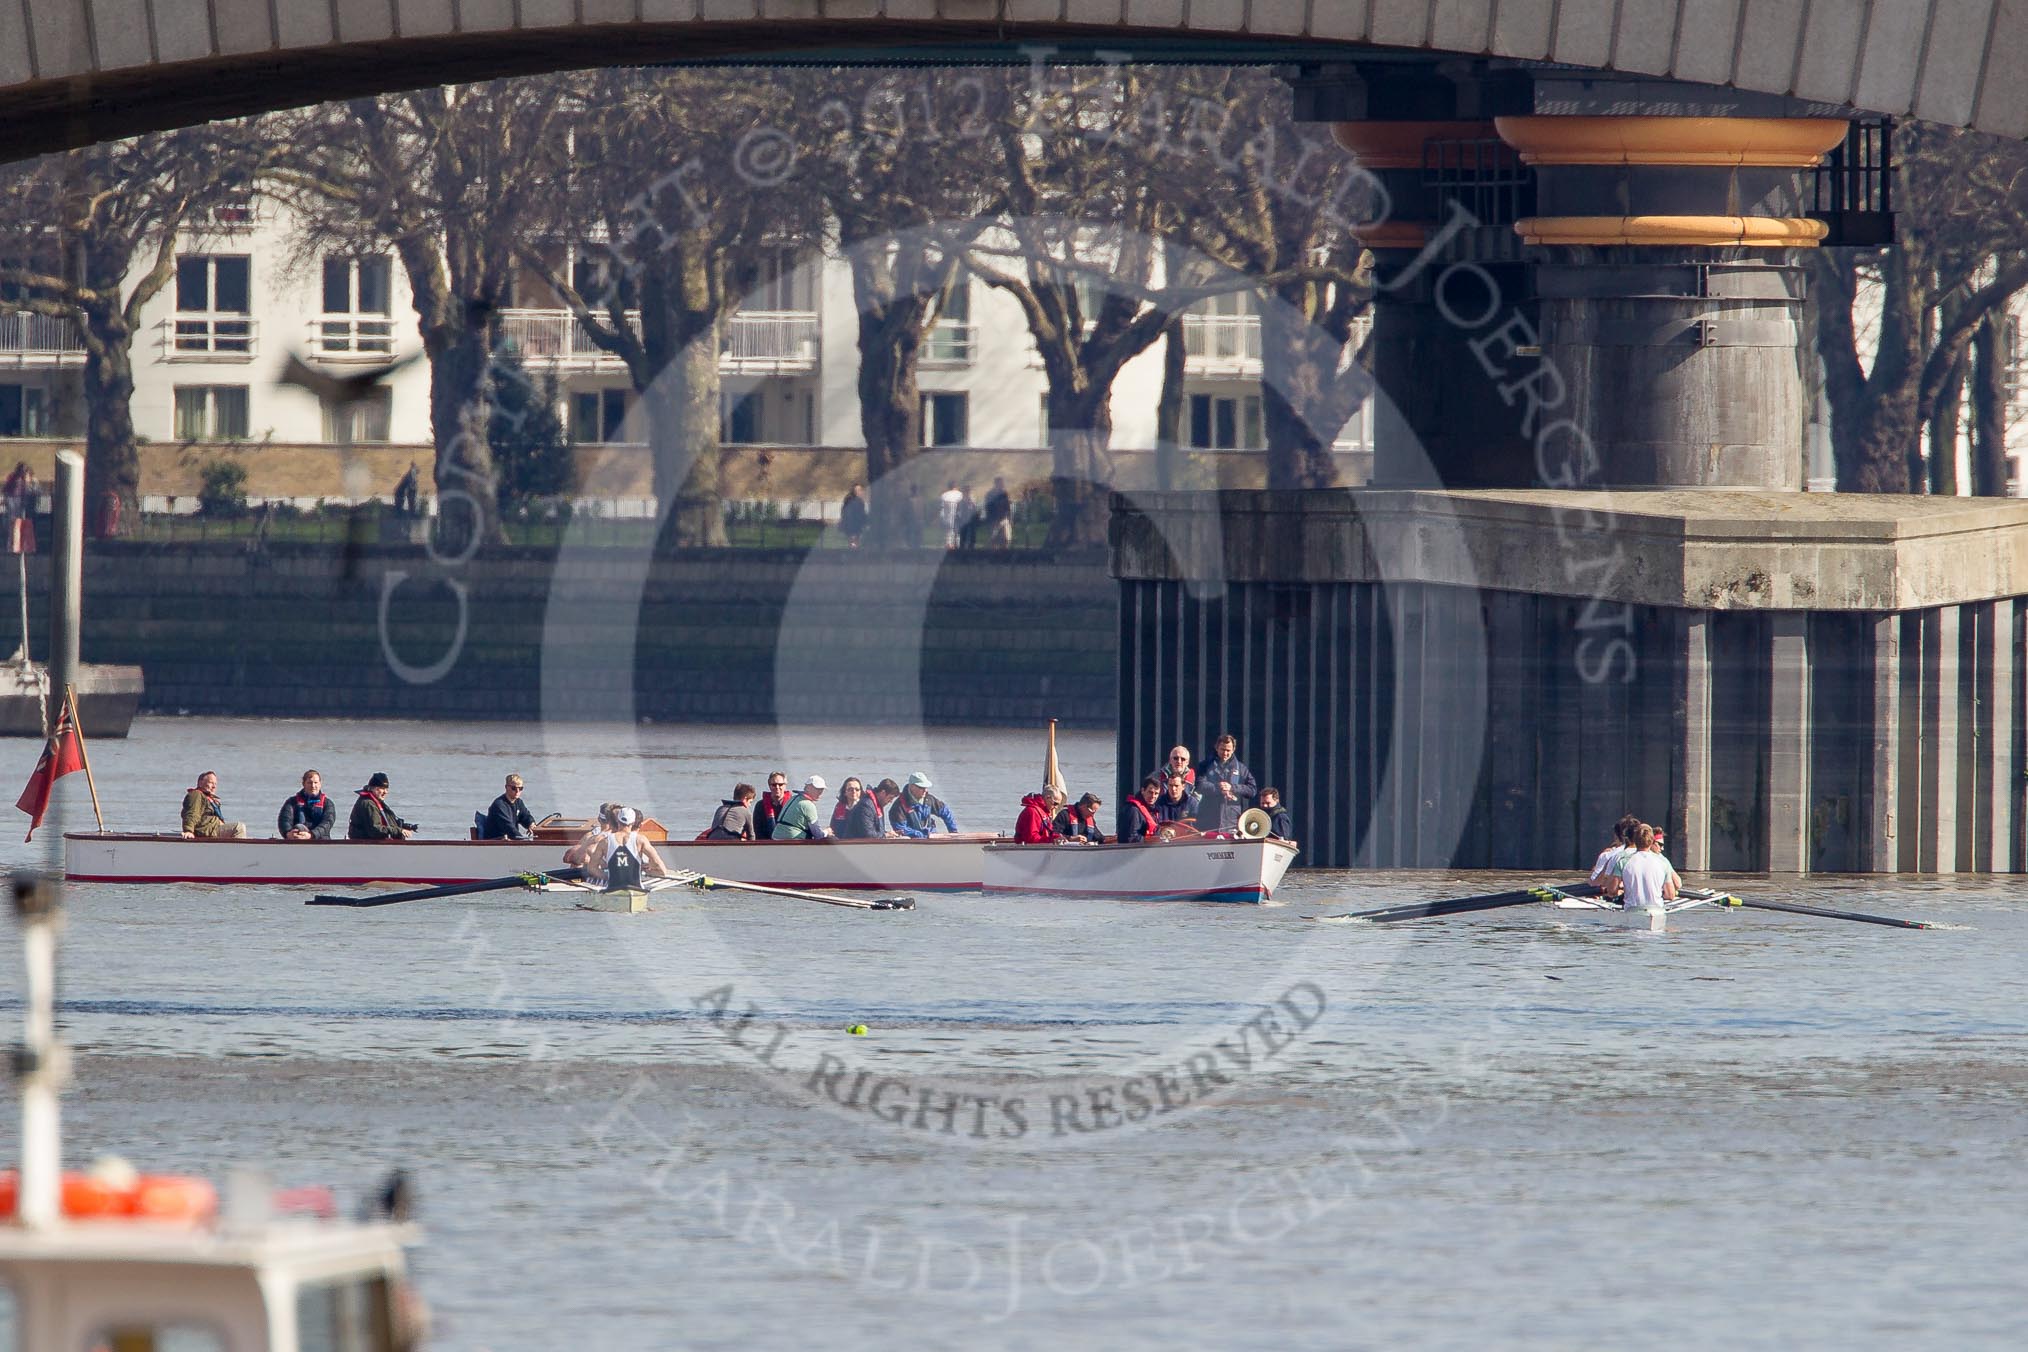 The Boat Race season 2012 - fixture CUBC vs Molesey BC: The start of the race, Molesey BC on the left, Cambridge Blue Boat on the right, behind umpire Boris Rankov..




on 25 March 2012 at 15:16, image #99